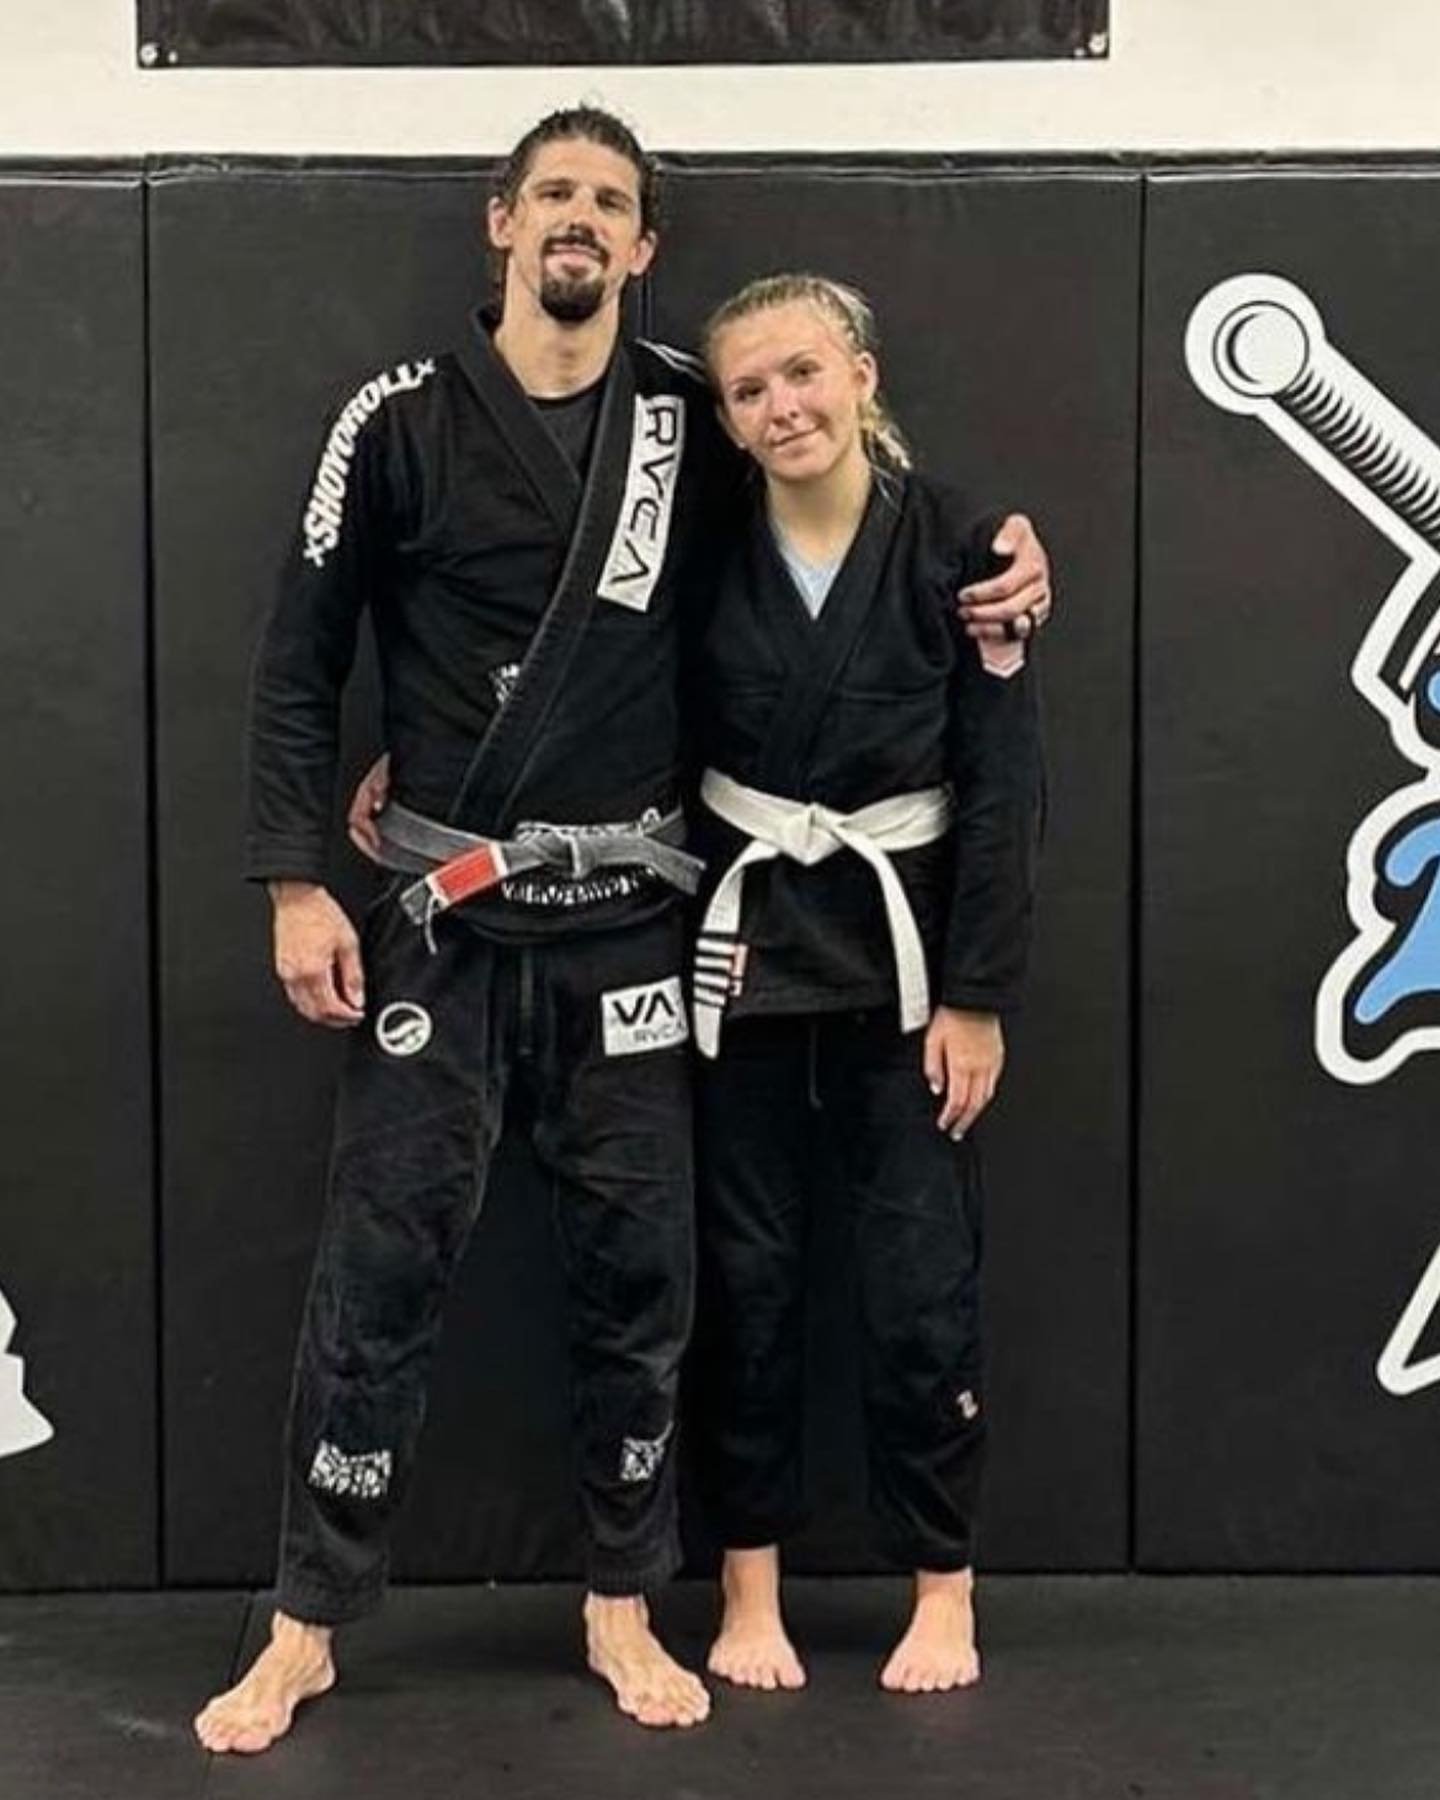 Congratulations are in order for Jake and Cara&rsquo;s recent promotions! 

@carajessiehooker has grown so much since she started and is about to grow out of that belt as well! She got her 4th stripe 🐅!

@jake._3  another congratulations is in order